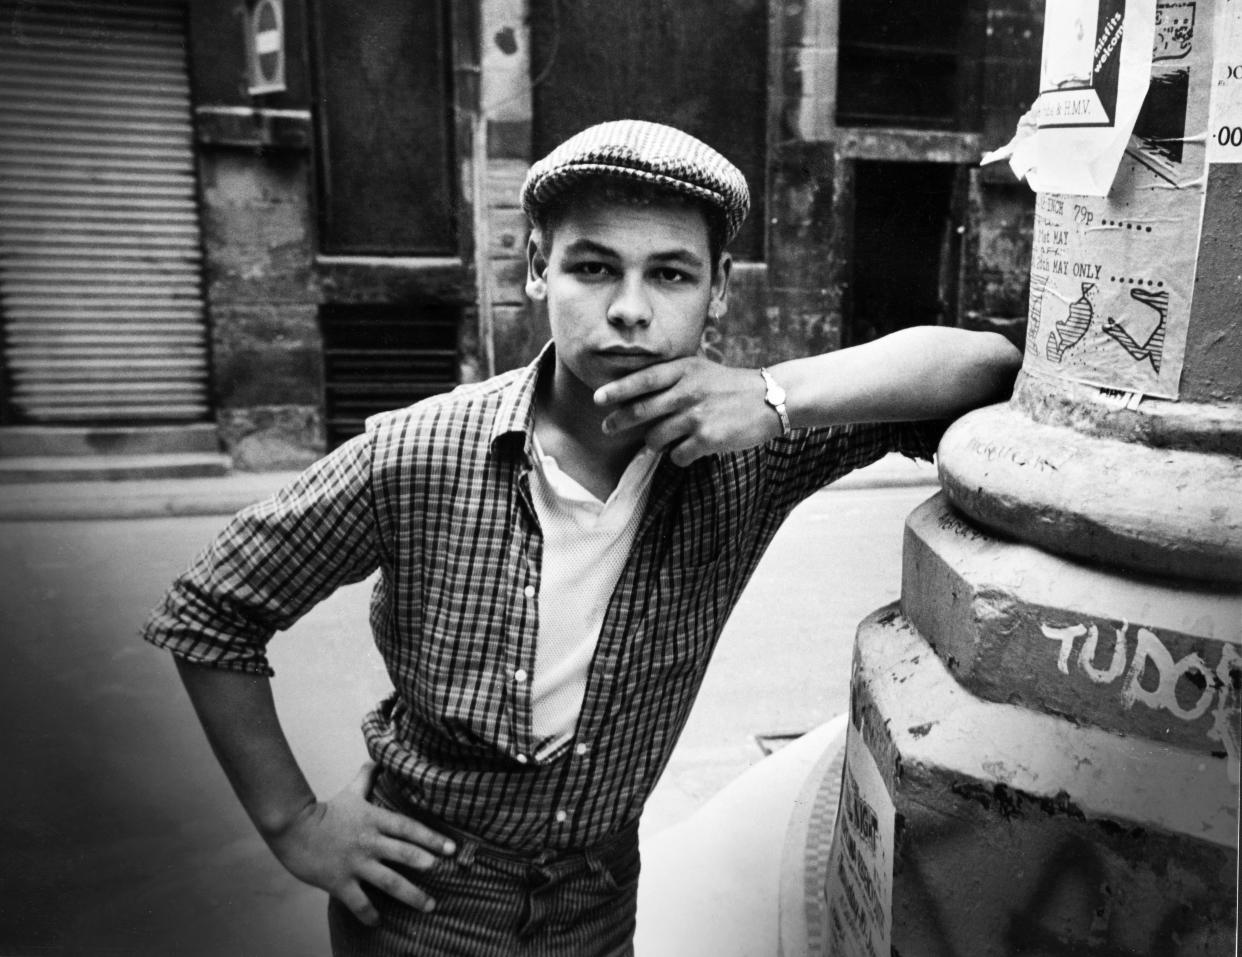 Liverpudlian television actor and comedian Craig Charles poses in his native city of Liverpool. 14th March 1985. (Photo by Stephen Shakeshaft/Liverpool Echo/MirrorpixGetty Images)